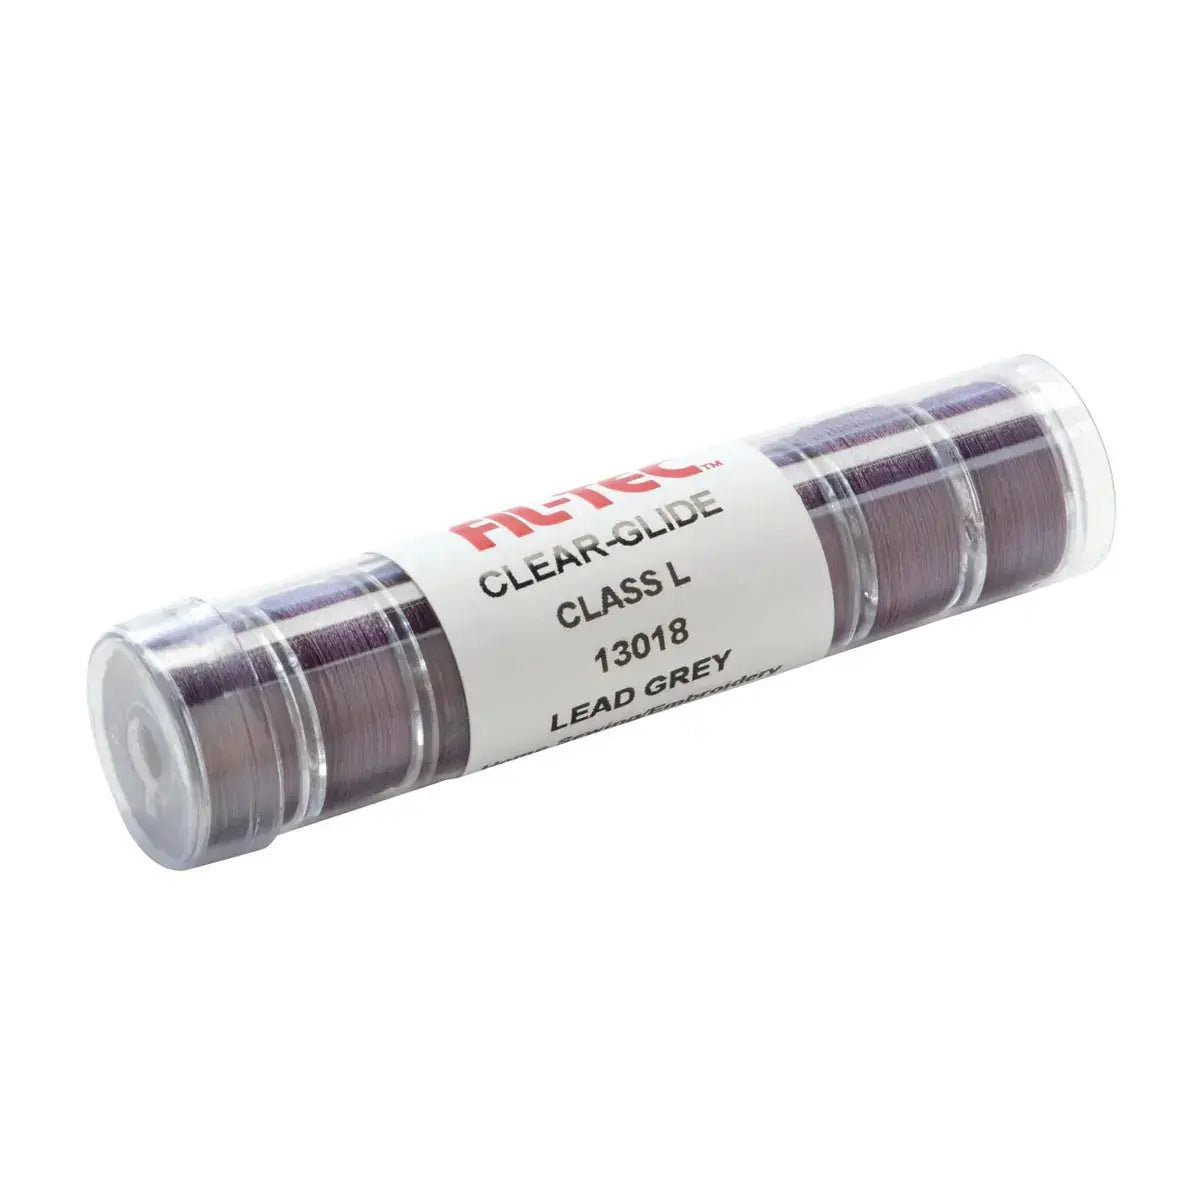 13018 Lead Grey Prewound Clear-Glide Bobbin Tube - Style L - Linda's Electric Quilters